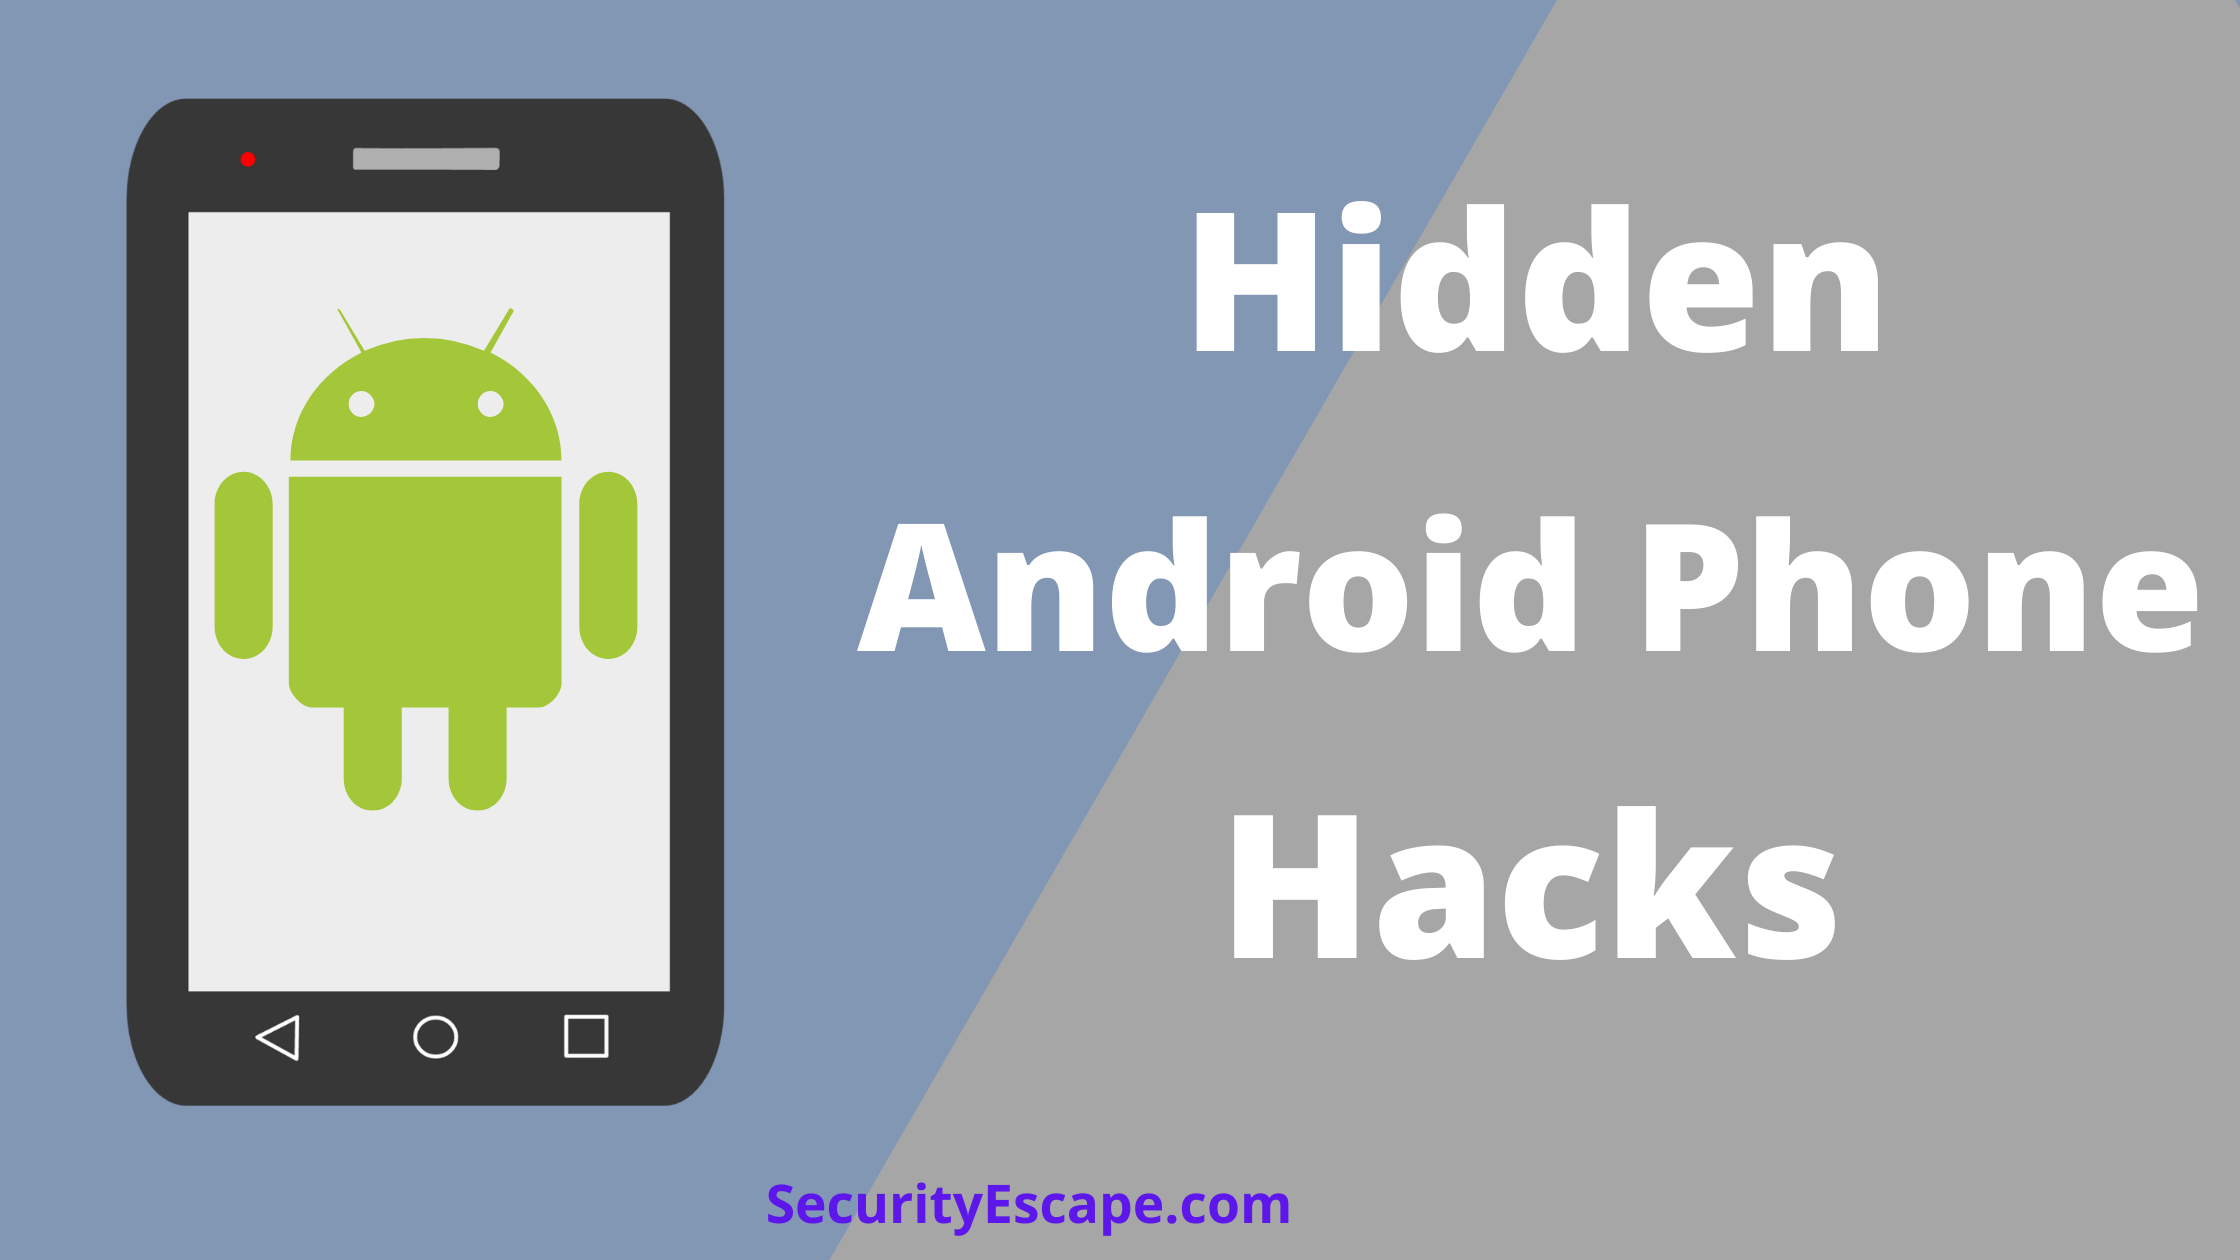 what are some hidden Android phone hacks